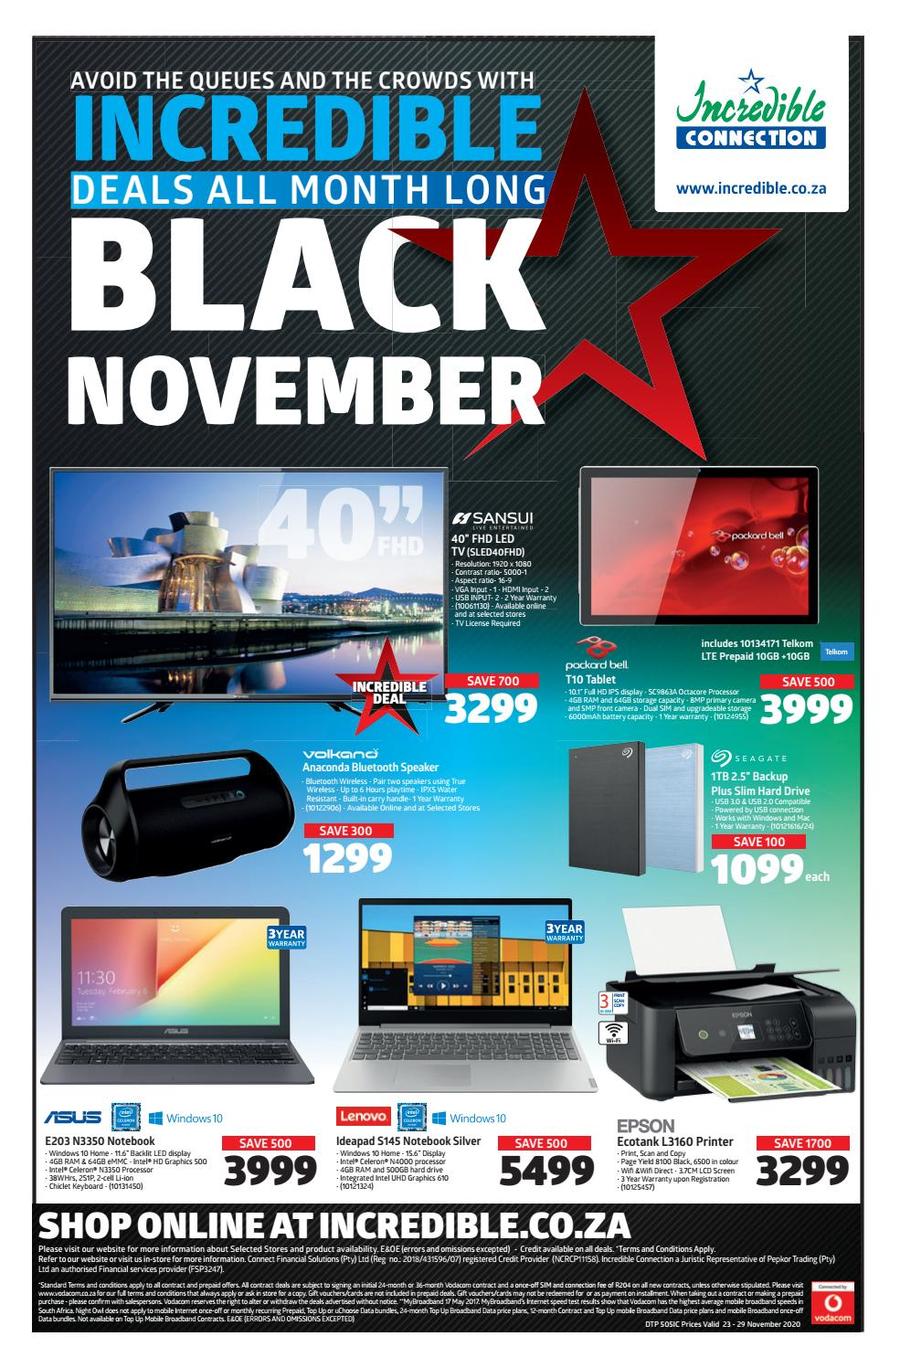 Incredible Connection Black Friday Deals 2021